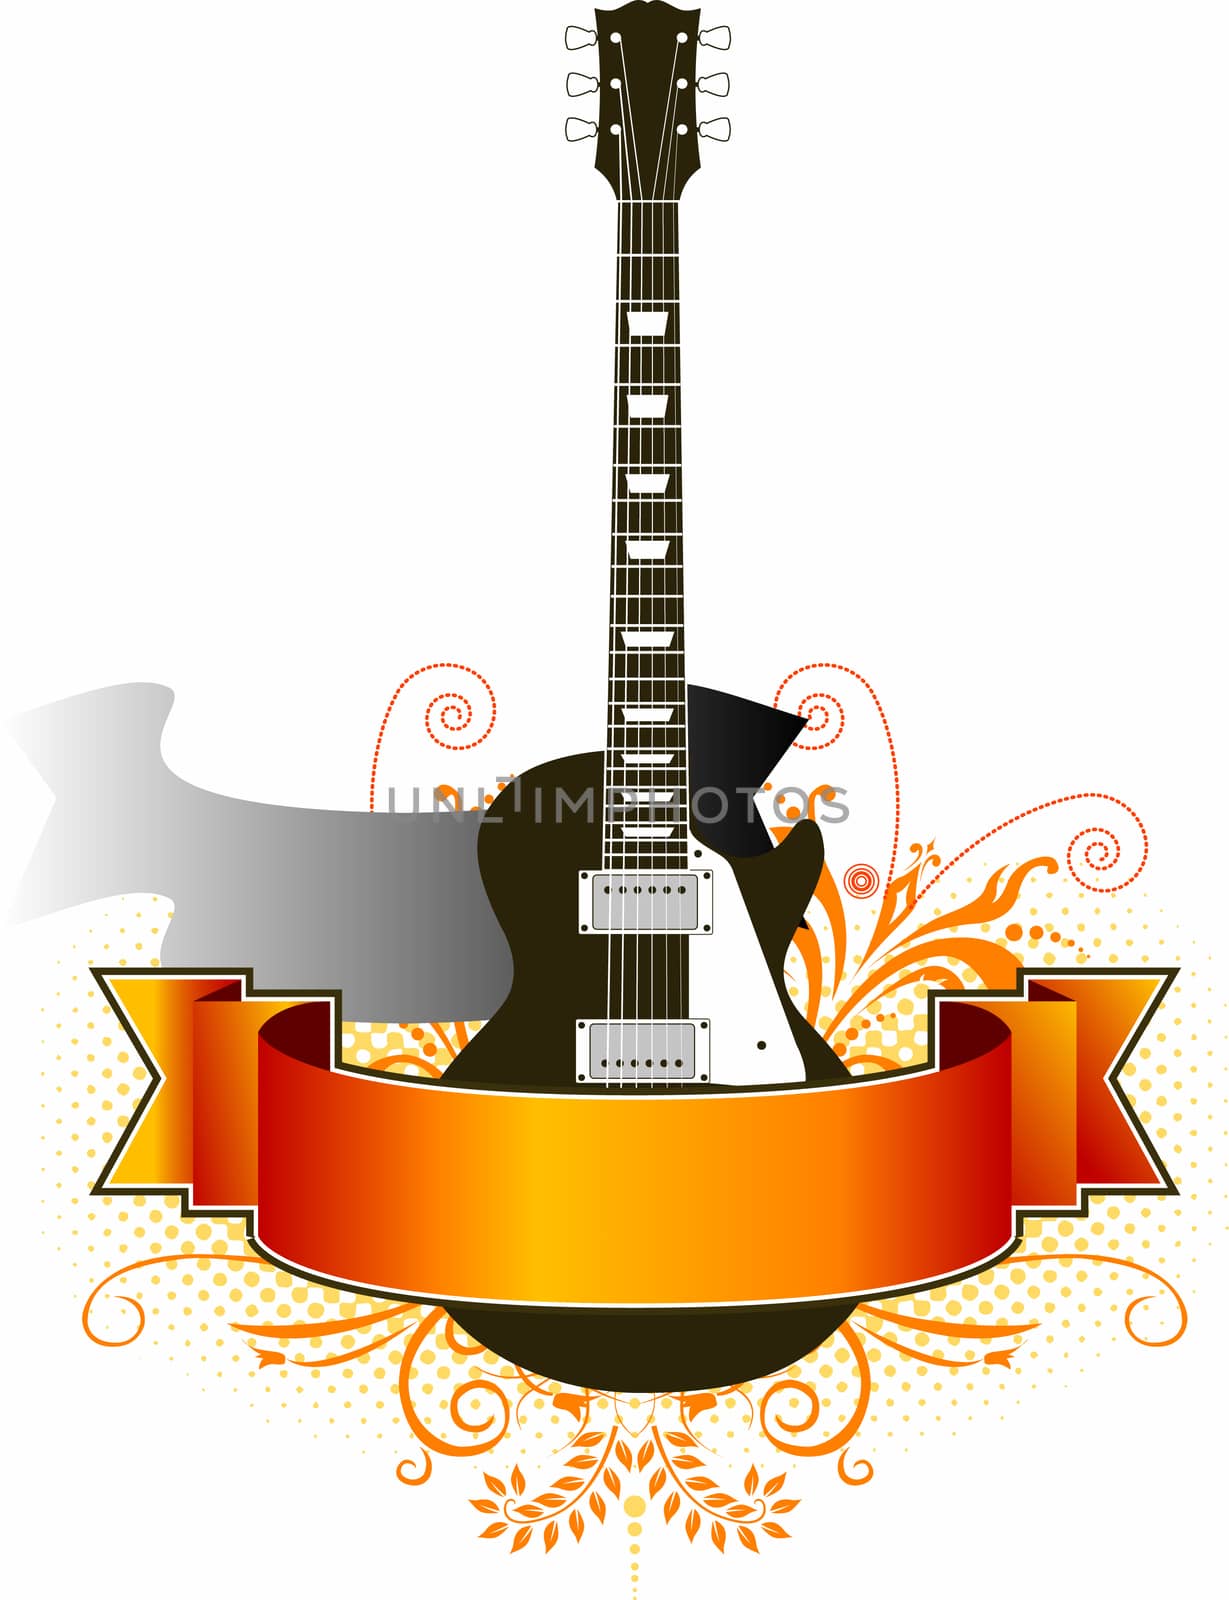 Guitar Vector Banner Design template by mike301